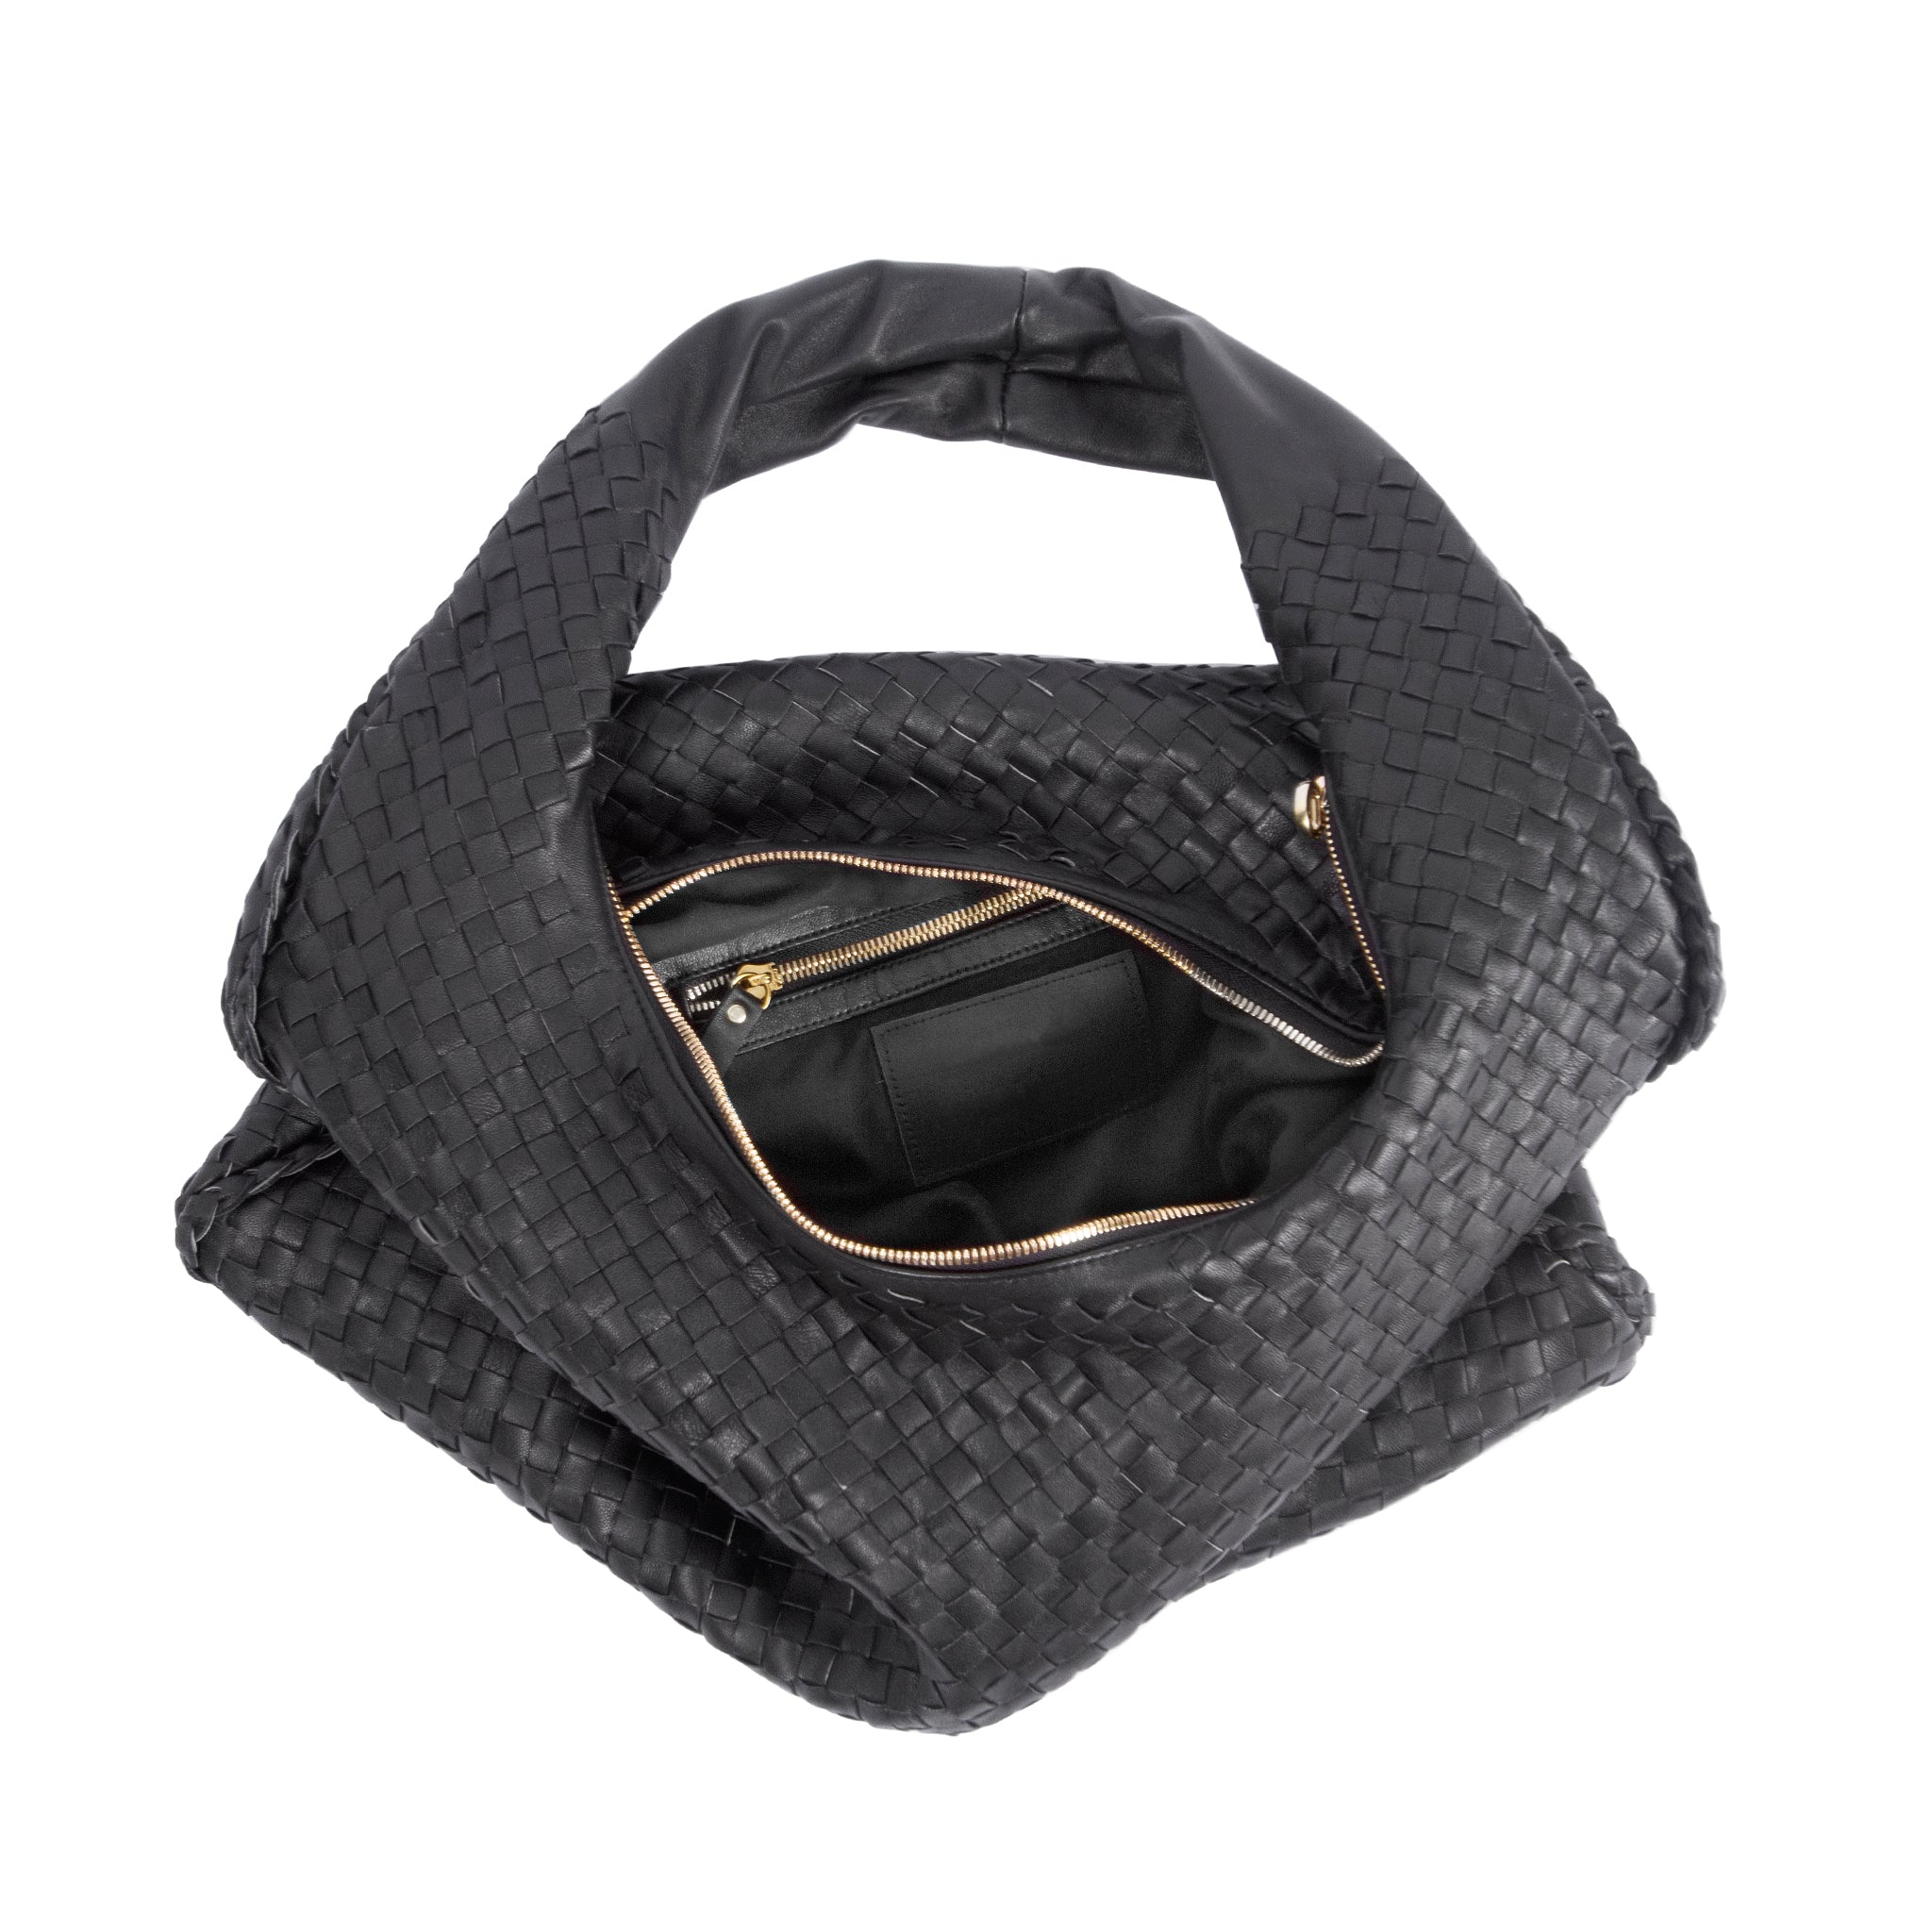 Inside view Woven Leather Slouchy Hobo Black Bag